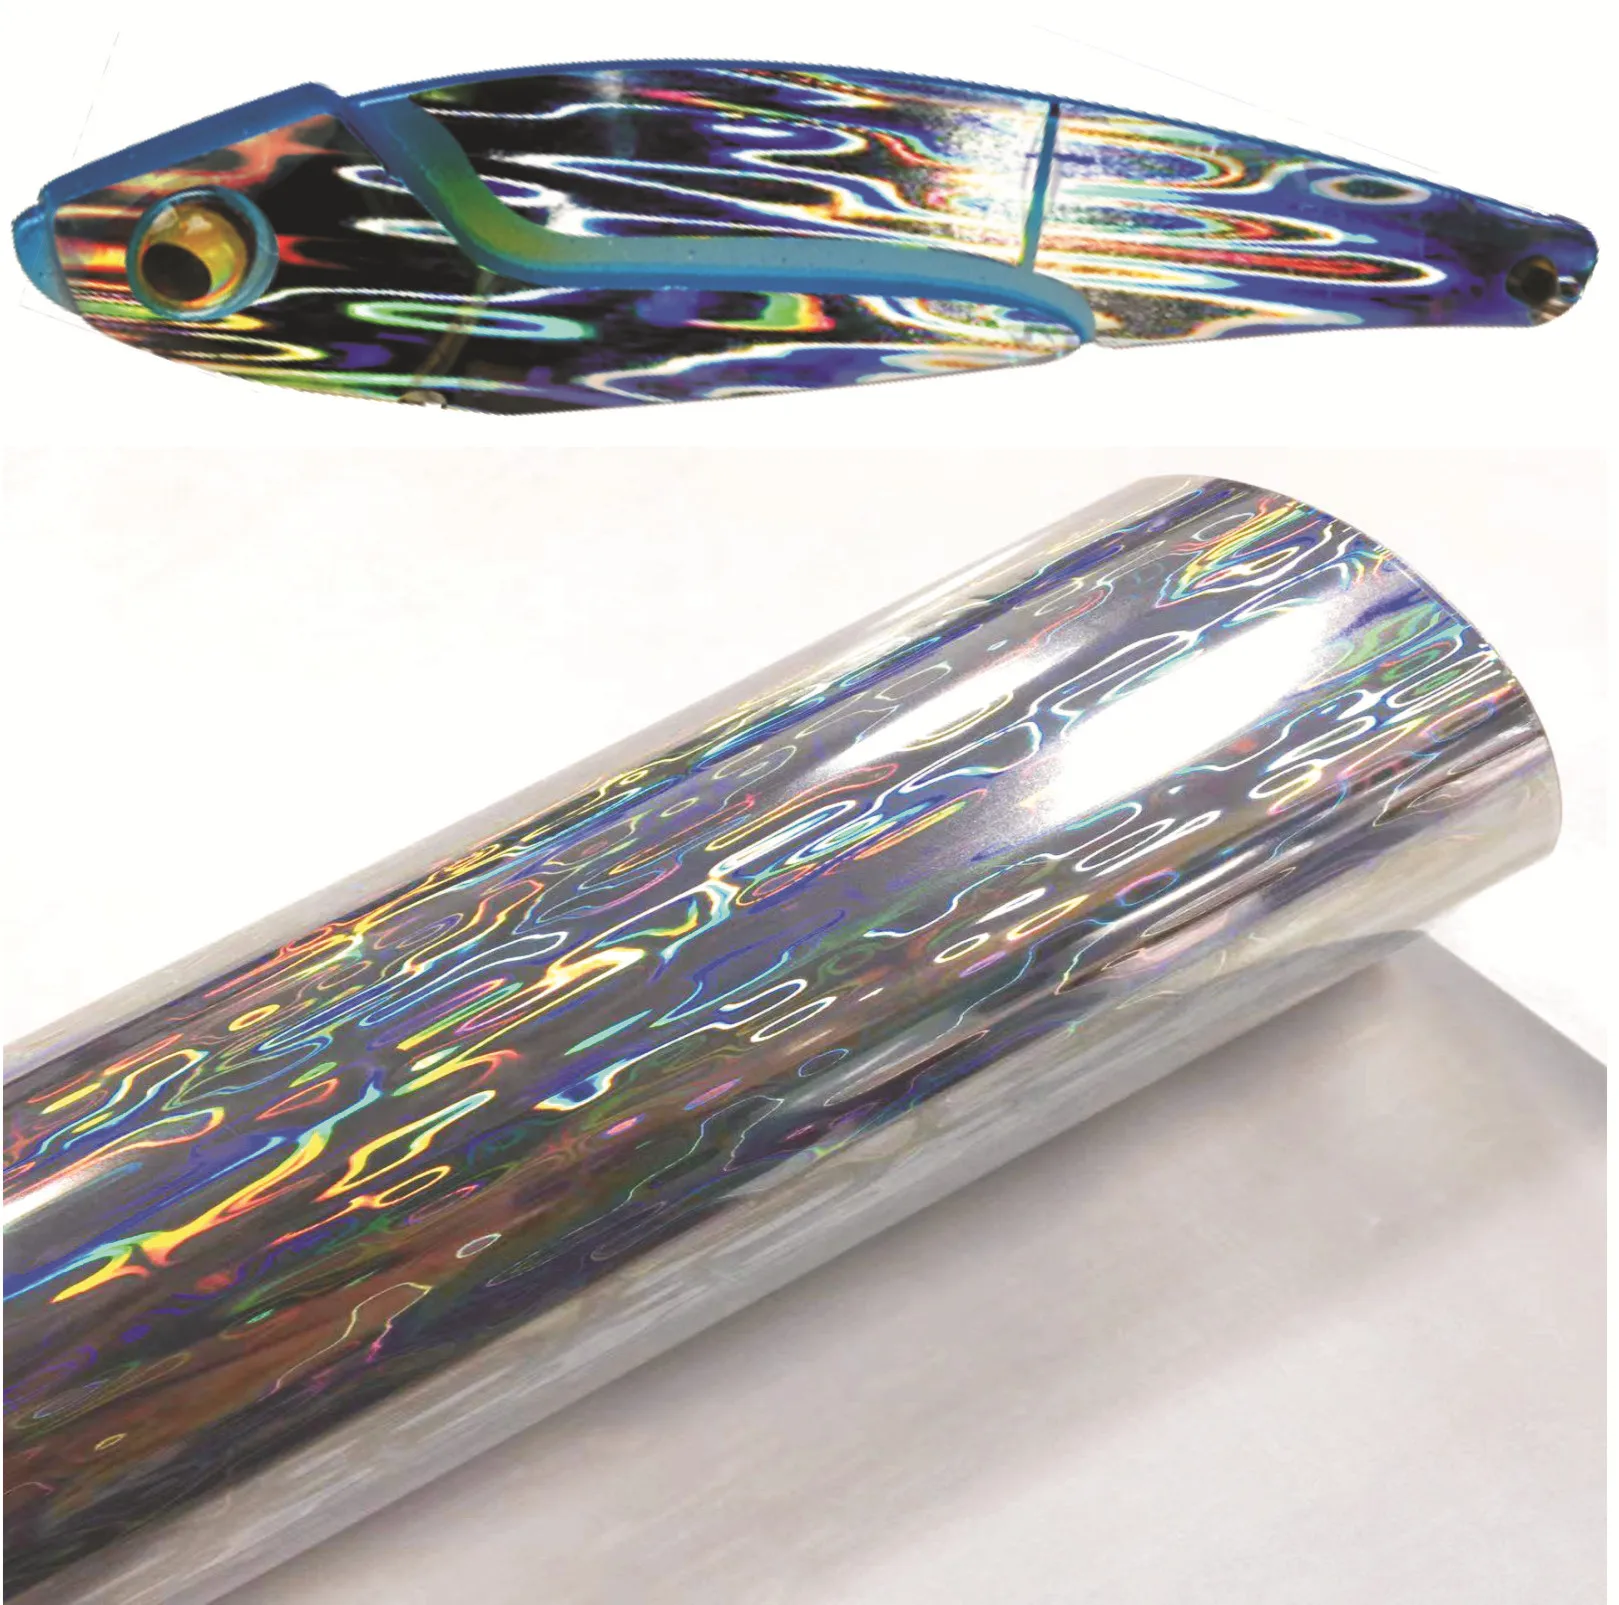 

Hot Stamping Holographic foil for Fishing Lure Foil DIY Jig Spoon Camping Light Water Ripper Films Fishing accessories